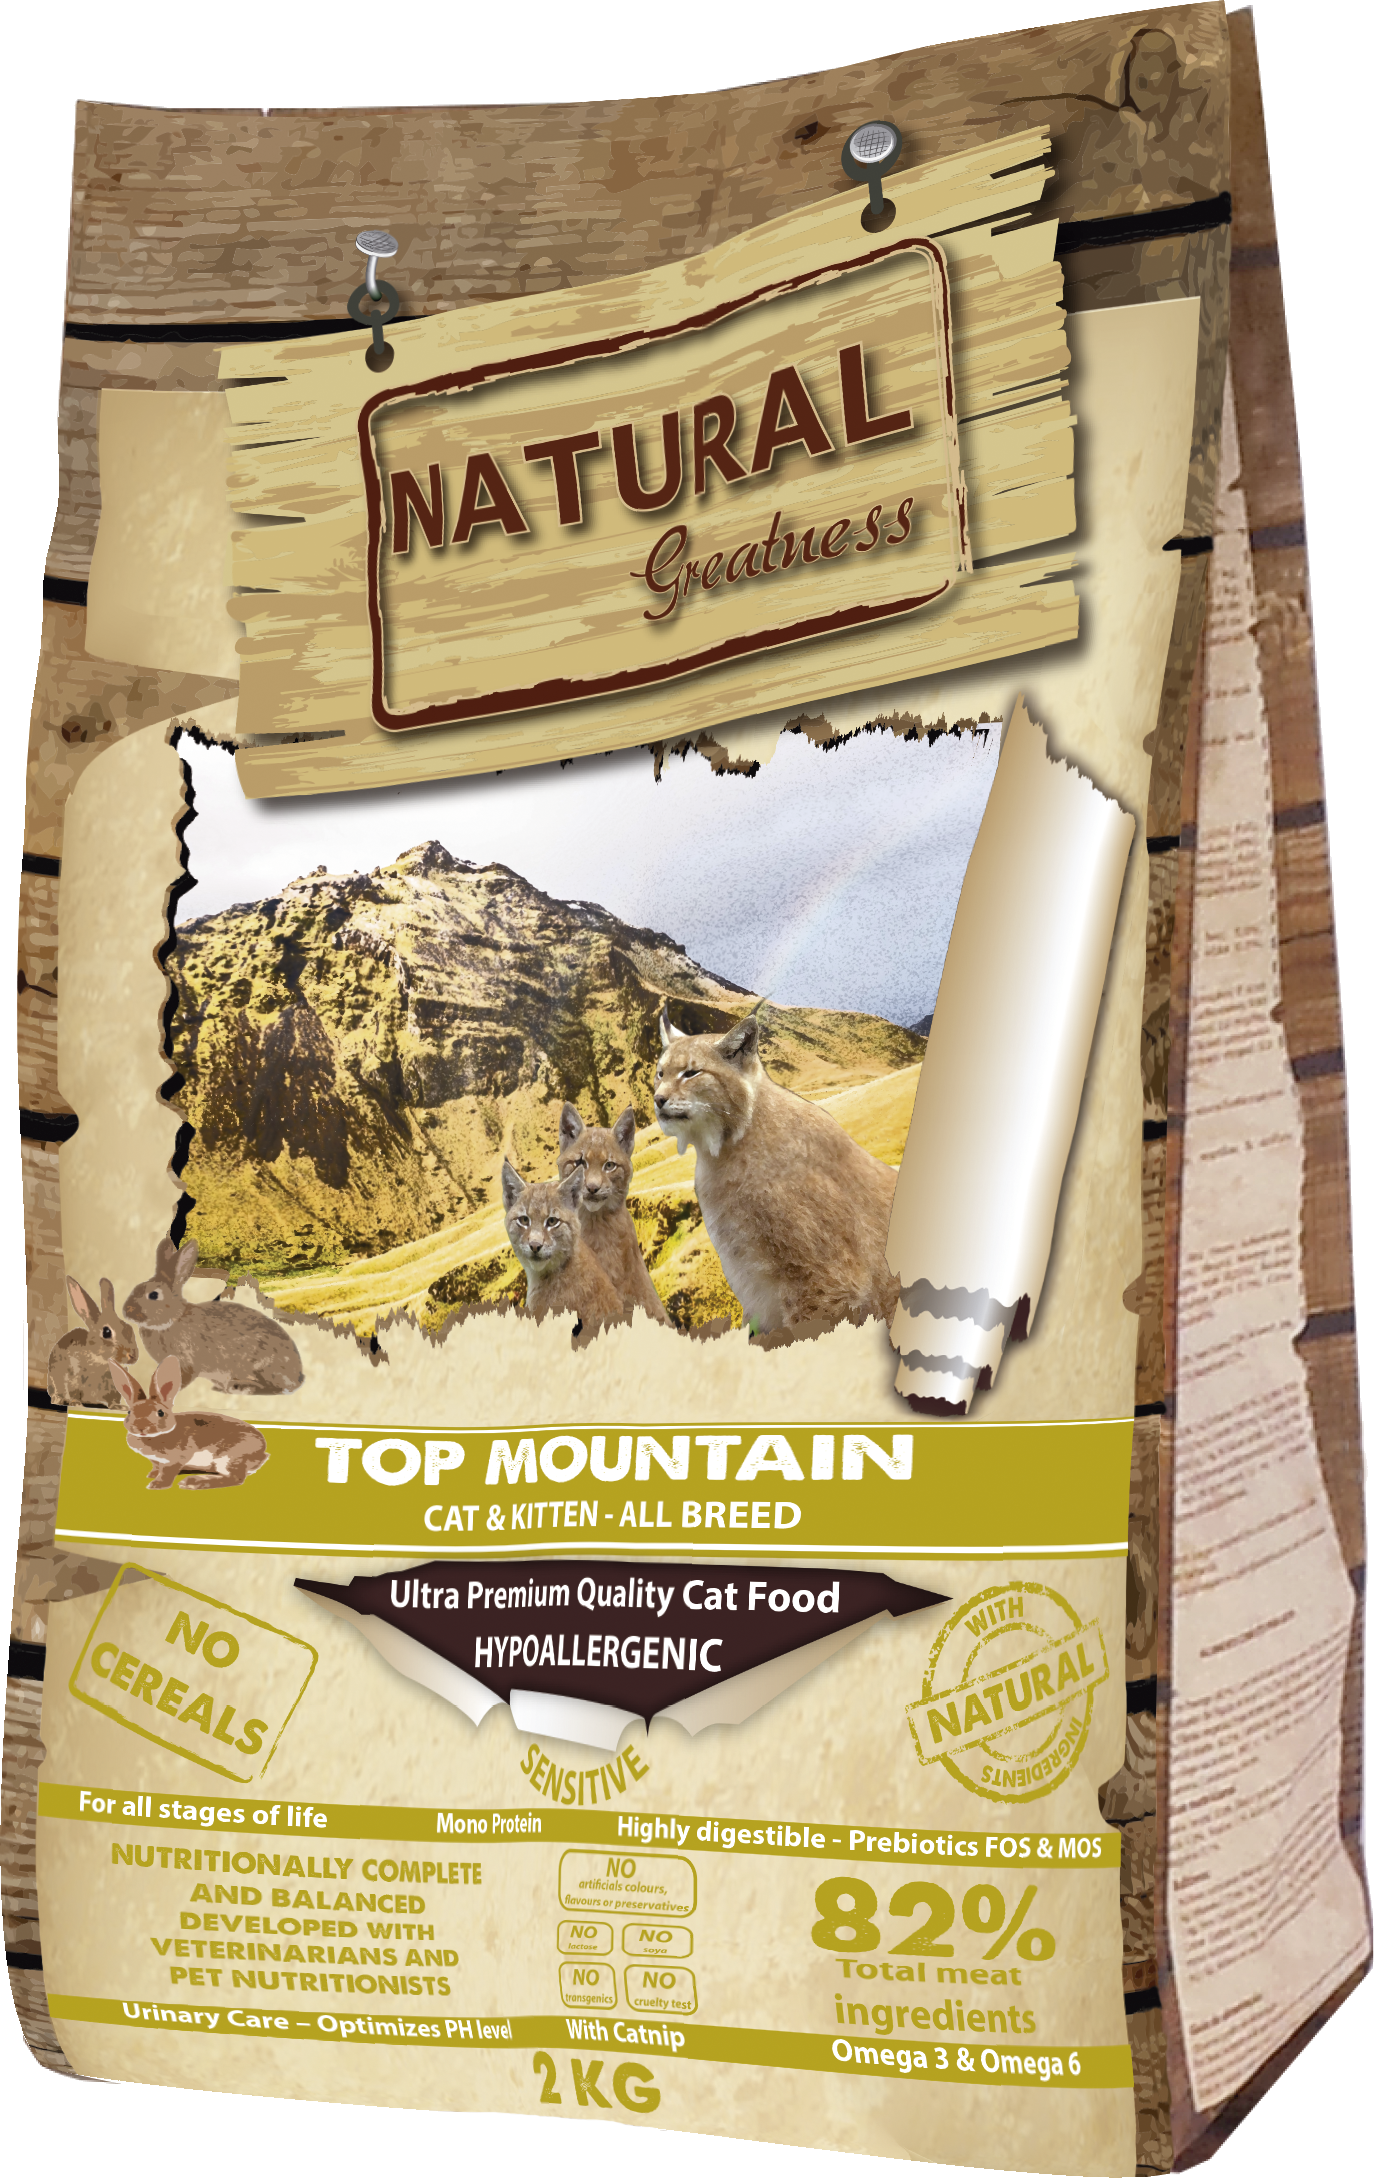 Natural Greatness Cat Top Mountain 2 kg - Chrysdietetic